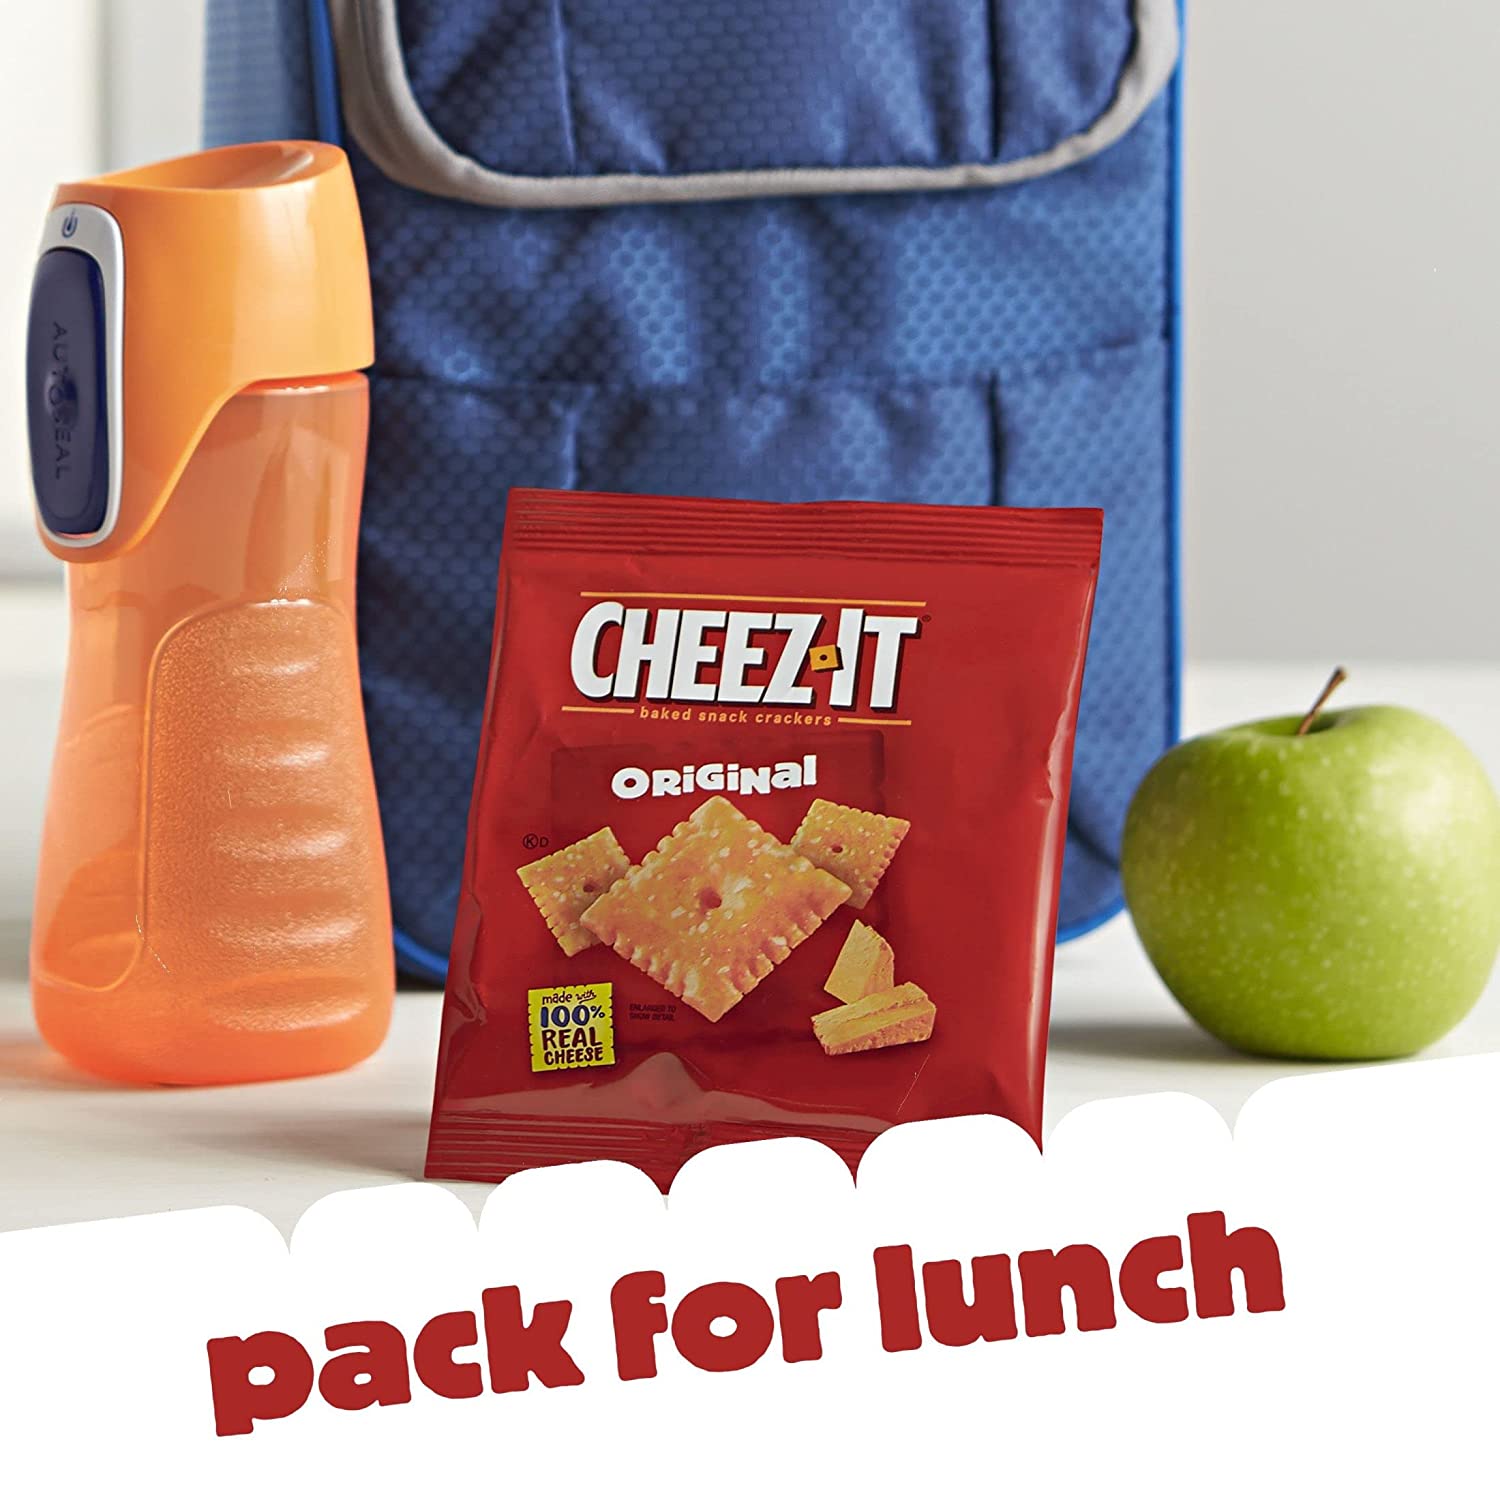 Cheez-It Cheese Crackers, Baked Snack Crackers, Office and Kids Snacks, Original, 40oz Case (40 Pouches)